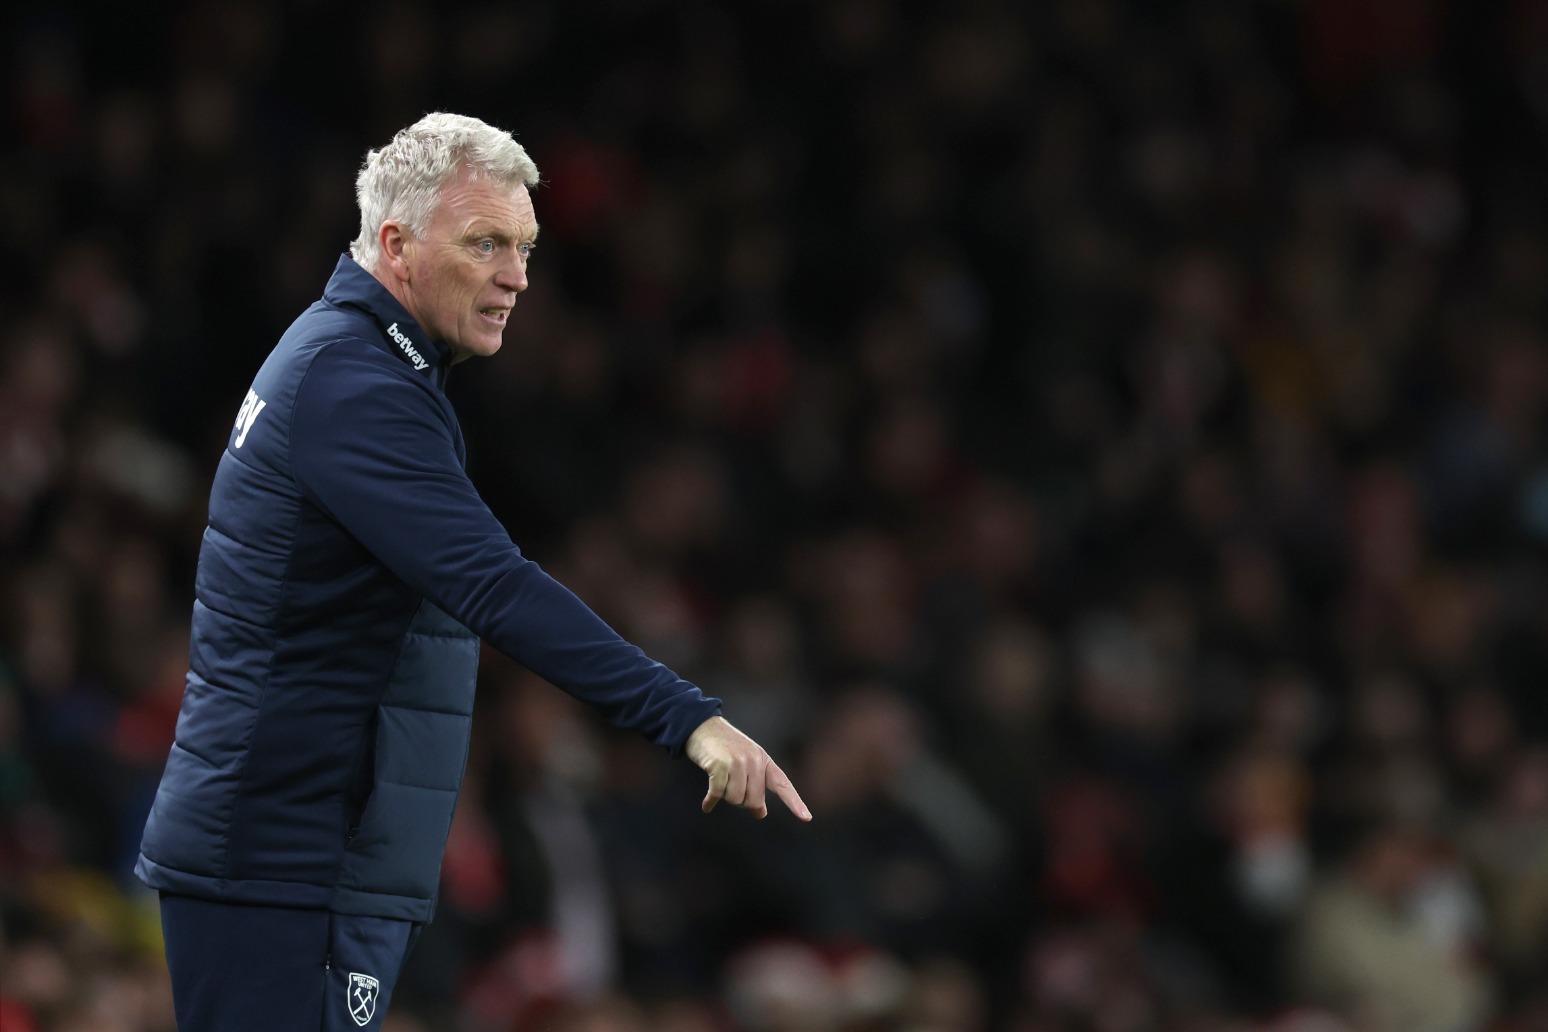 David Moyes confident of board backing as he looks to turn West Ham around 